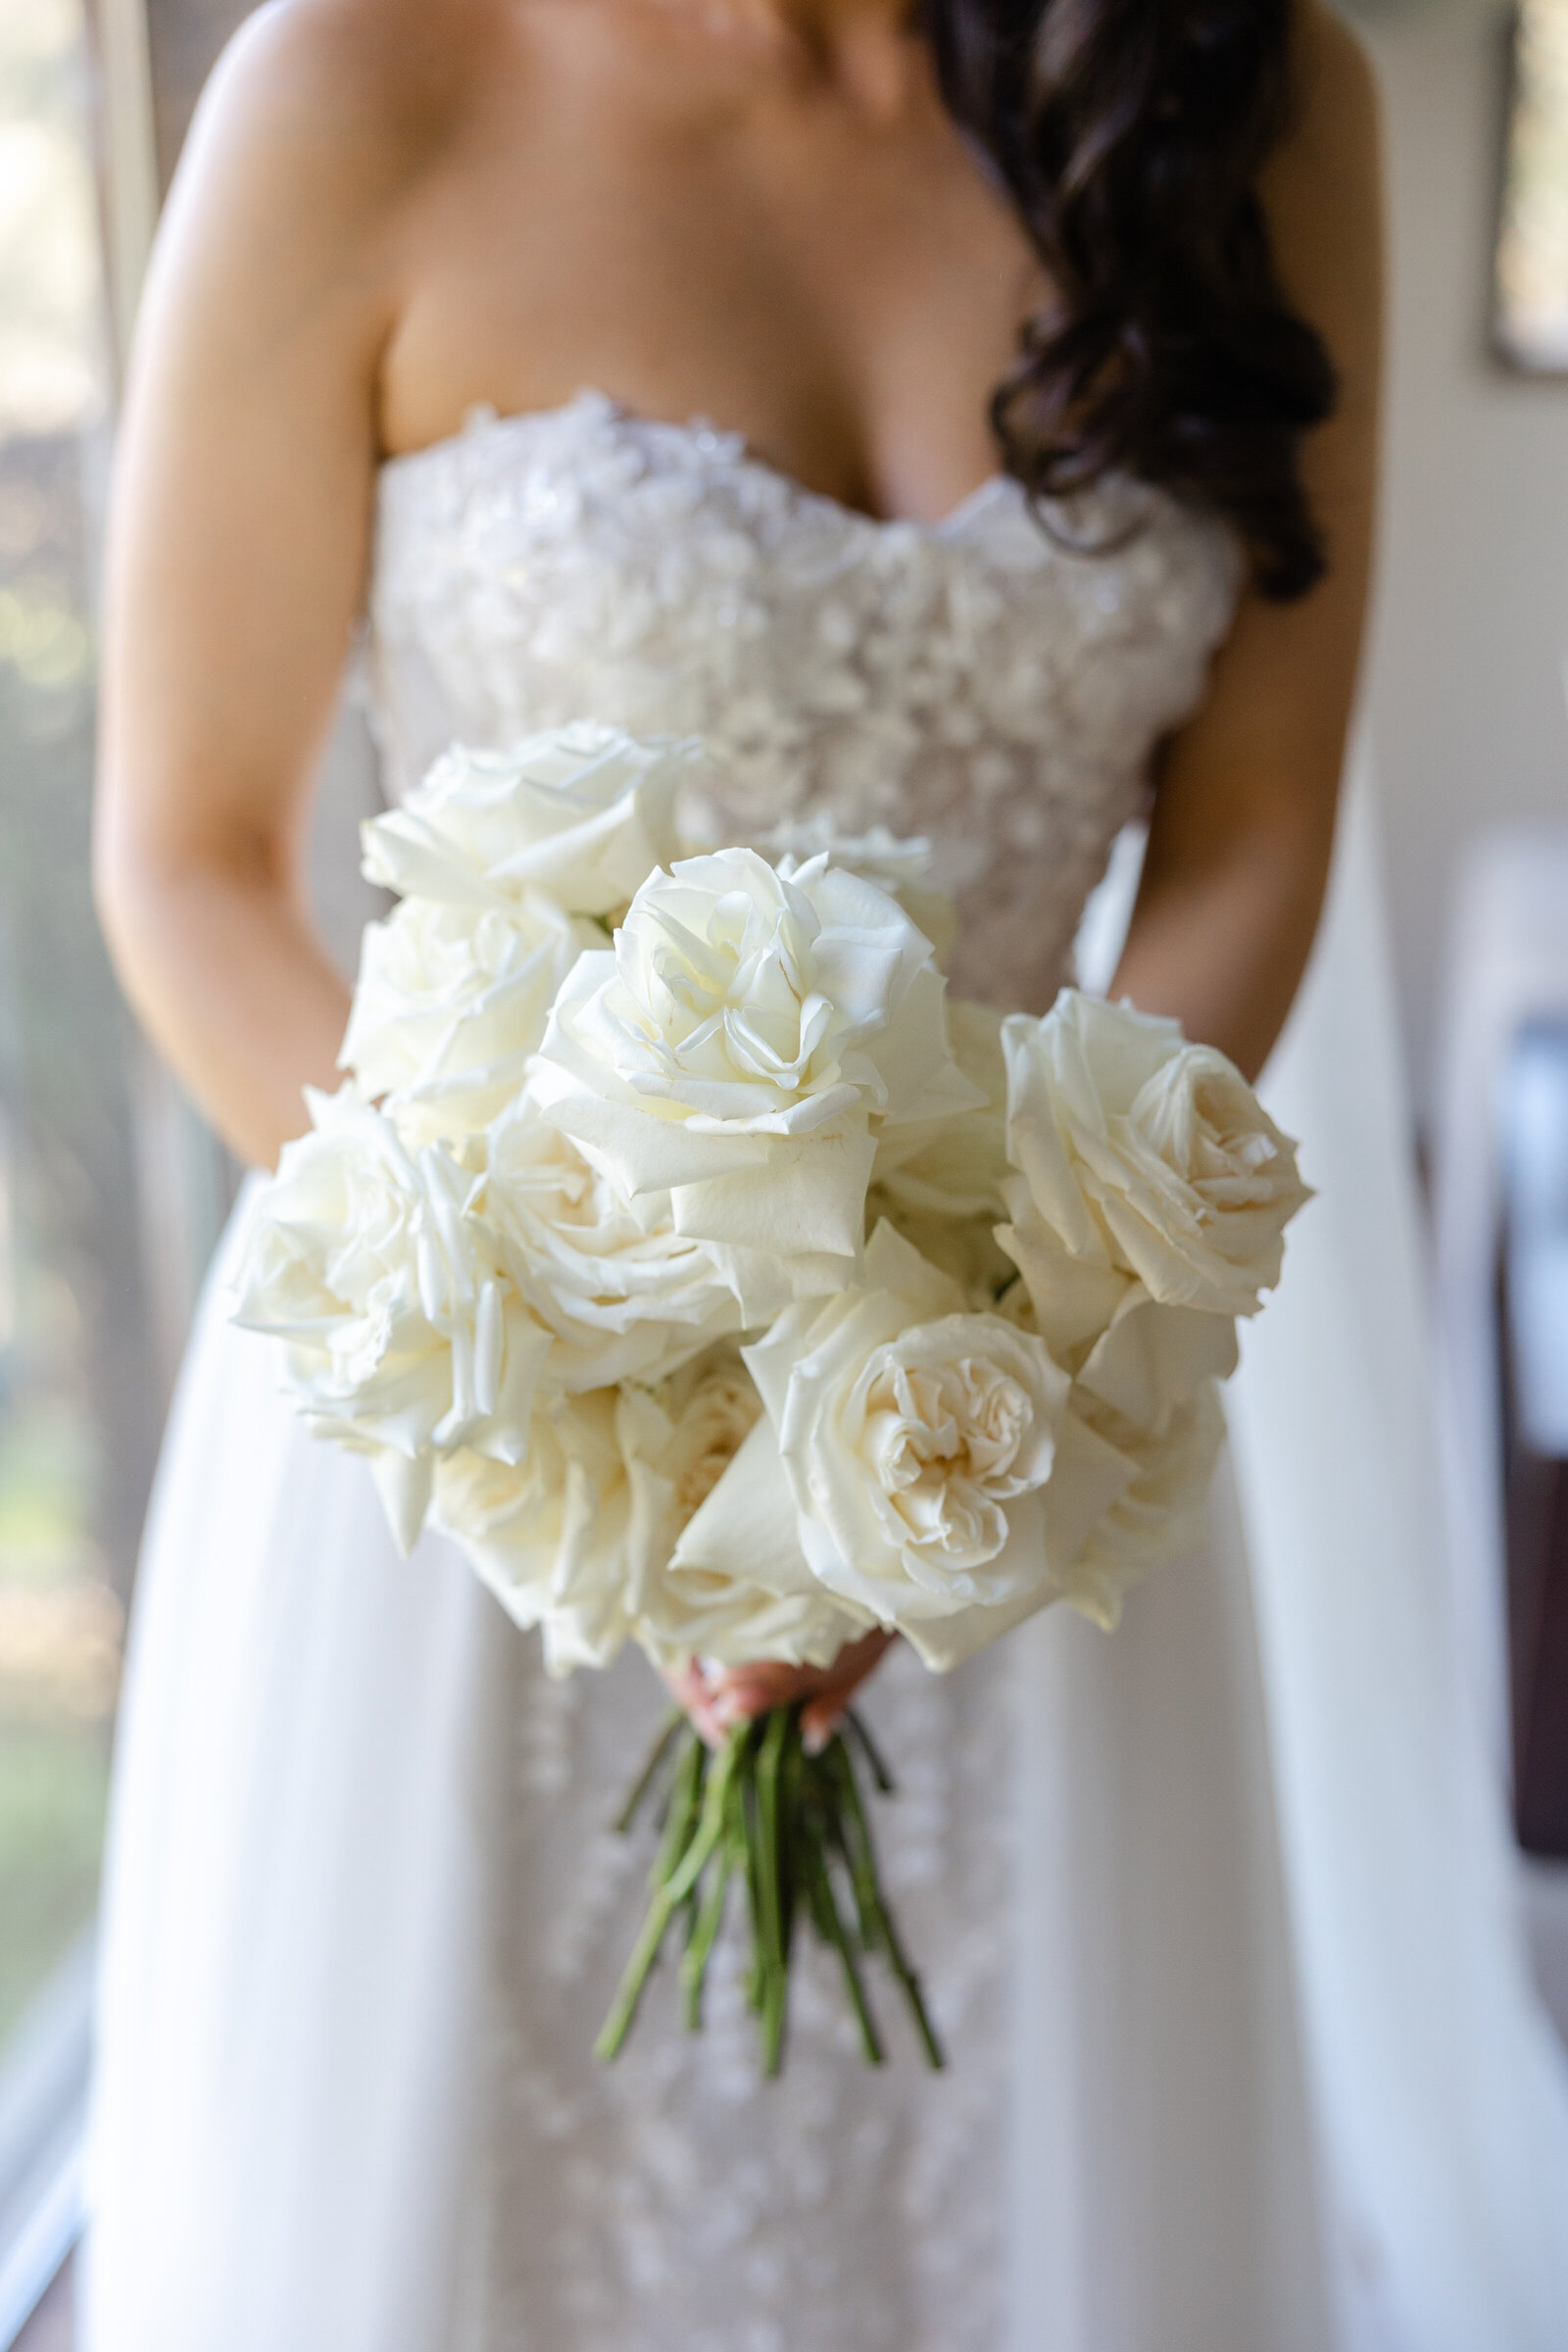 Classic wedding bouquet of white roses